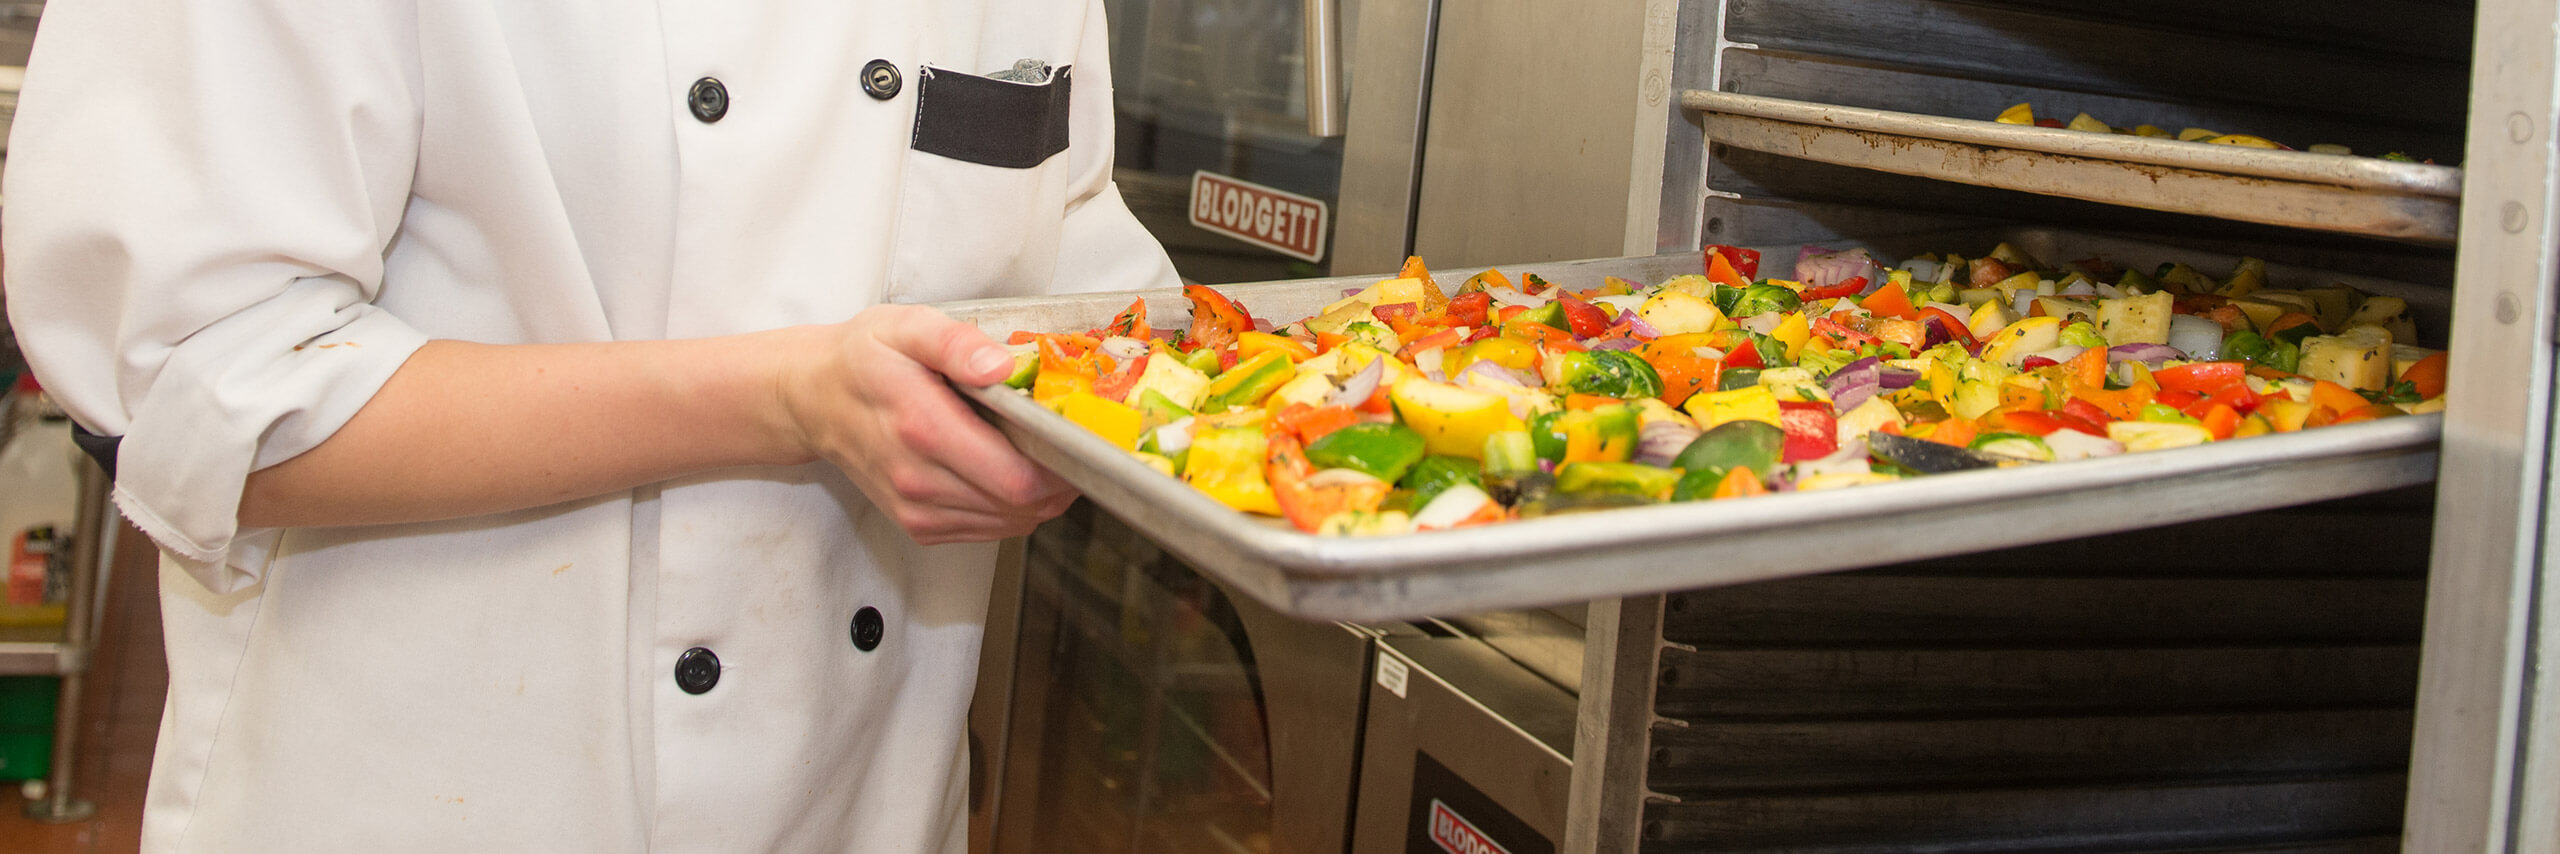 ISU Campus Dining Service Worker with a trail of vegetables